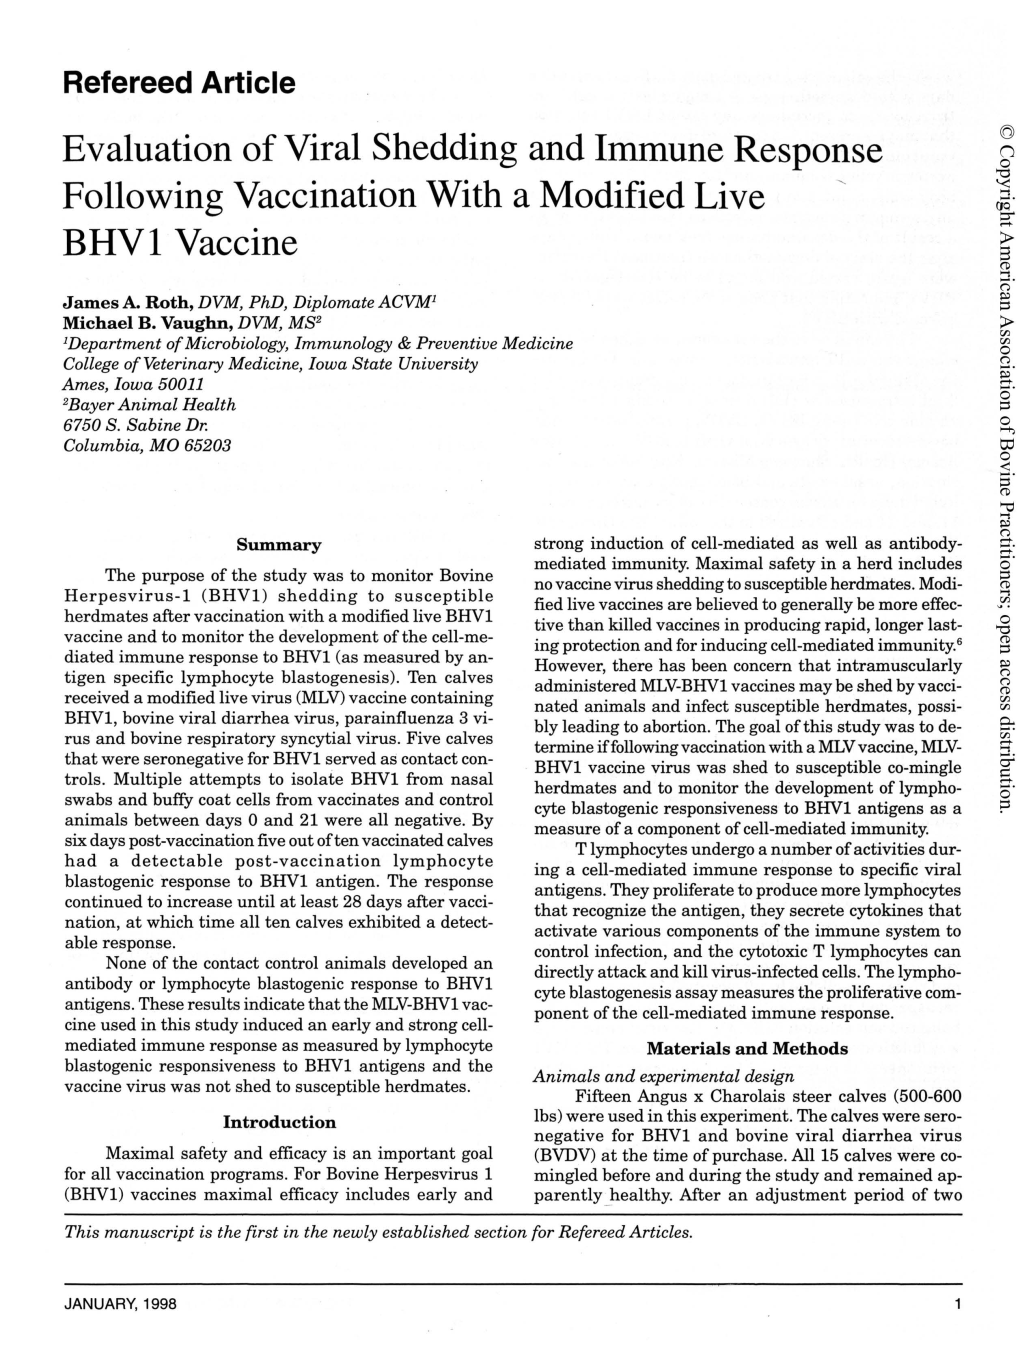 Evaluation of Viral Shedding and Iininune Response Following Vaccination with a Modified Live Bhvl Vaccine